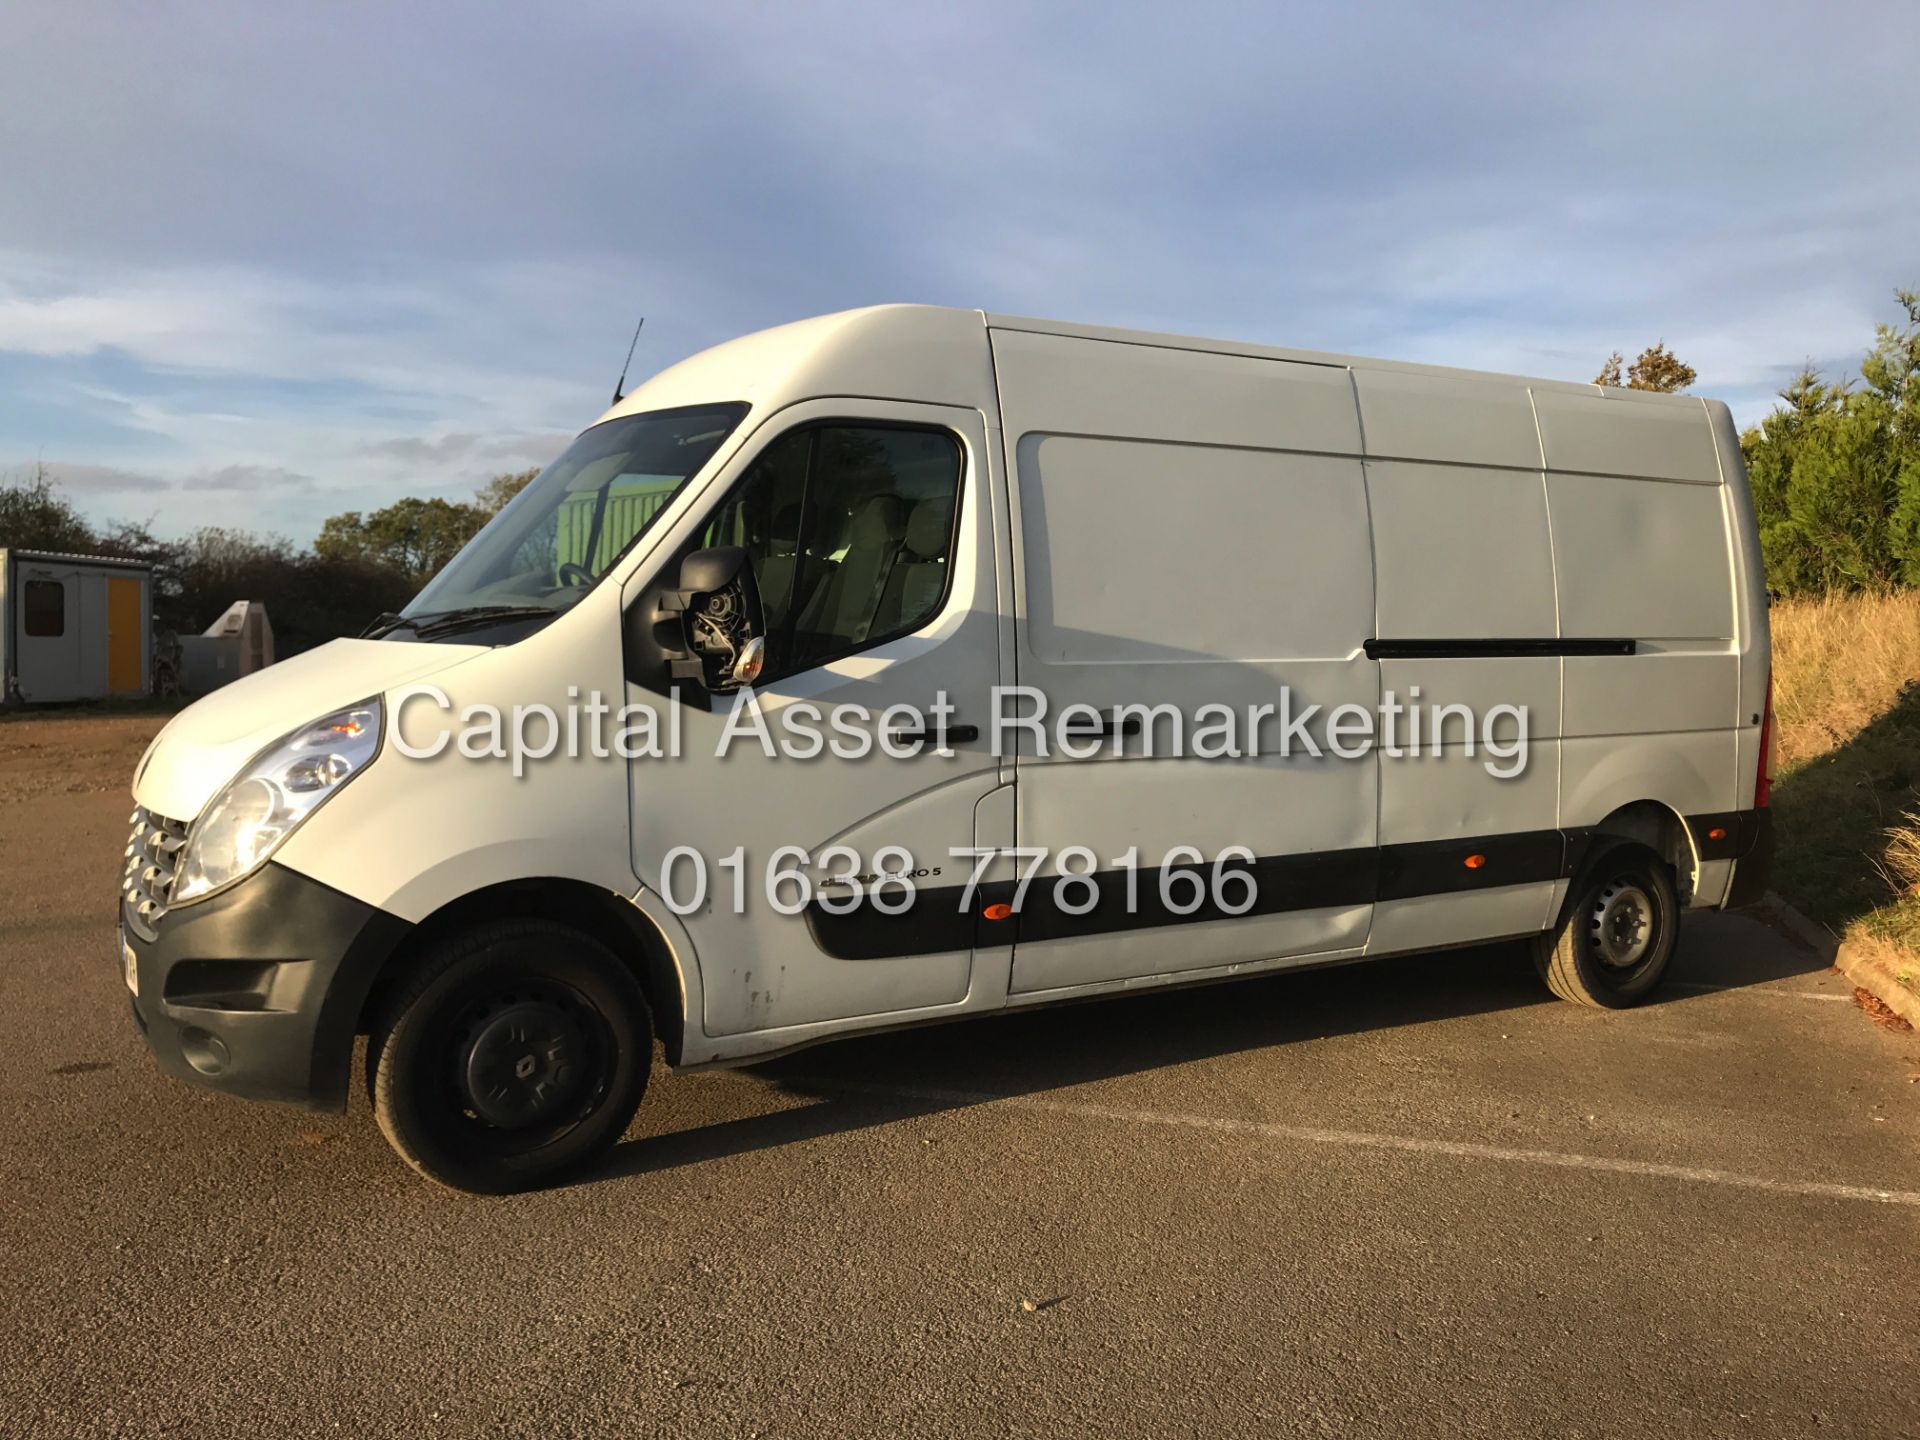 On Sale RENAULT MASTER LM35 2.3DCI LONG WHEEL BASE - 62 REG - NEW SHAPE - 1 OWNER - AIR CON - - Image 5 of 10